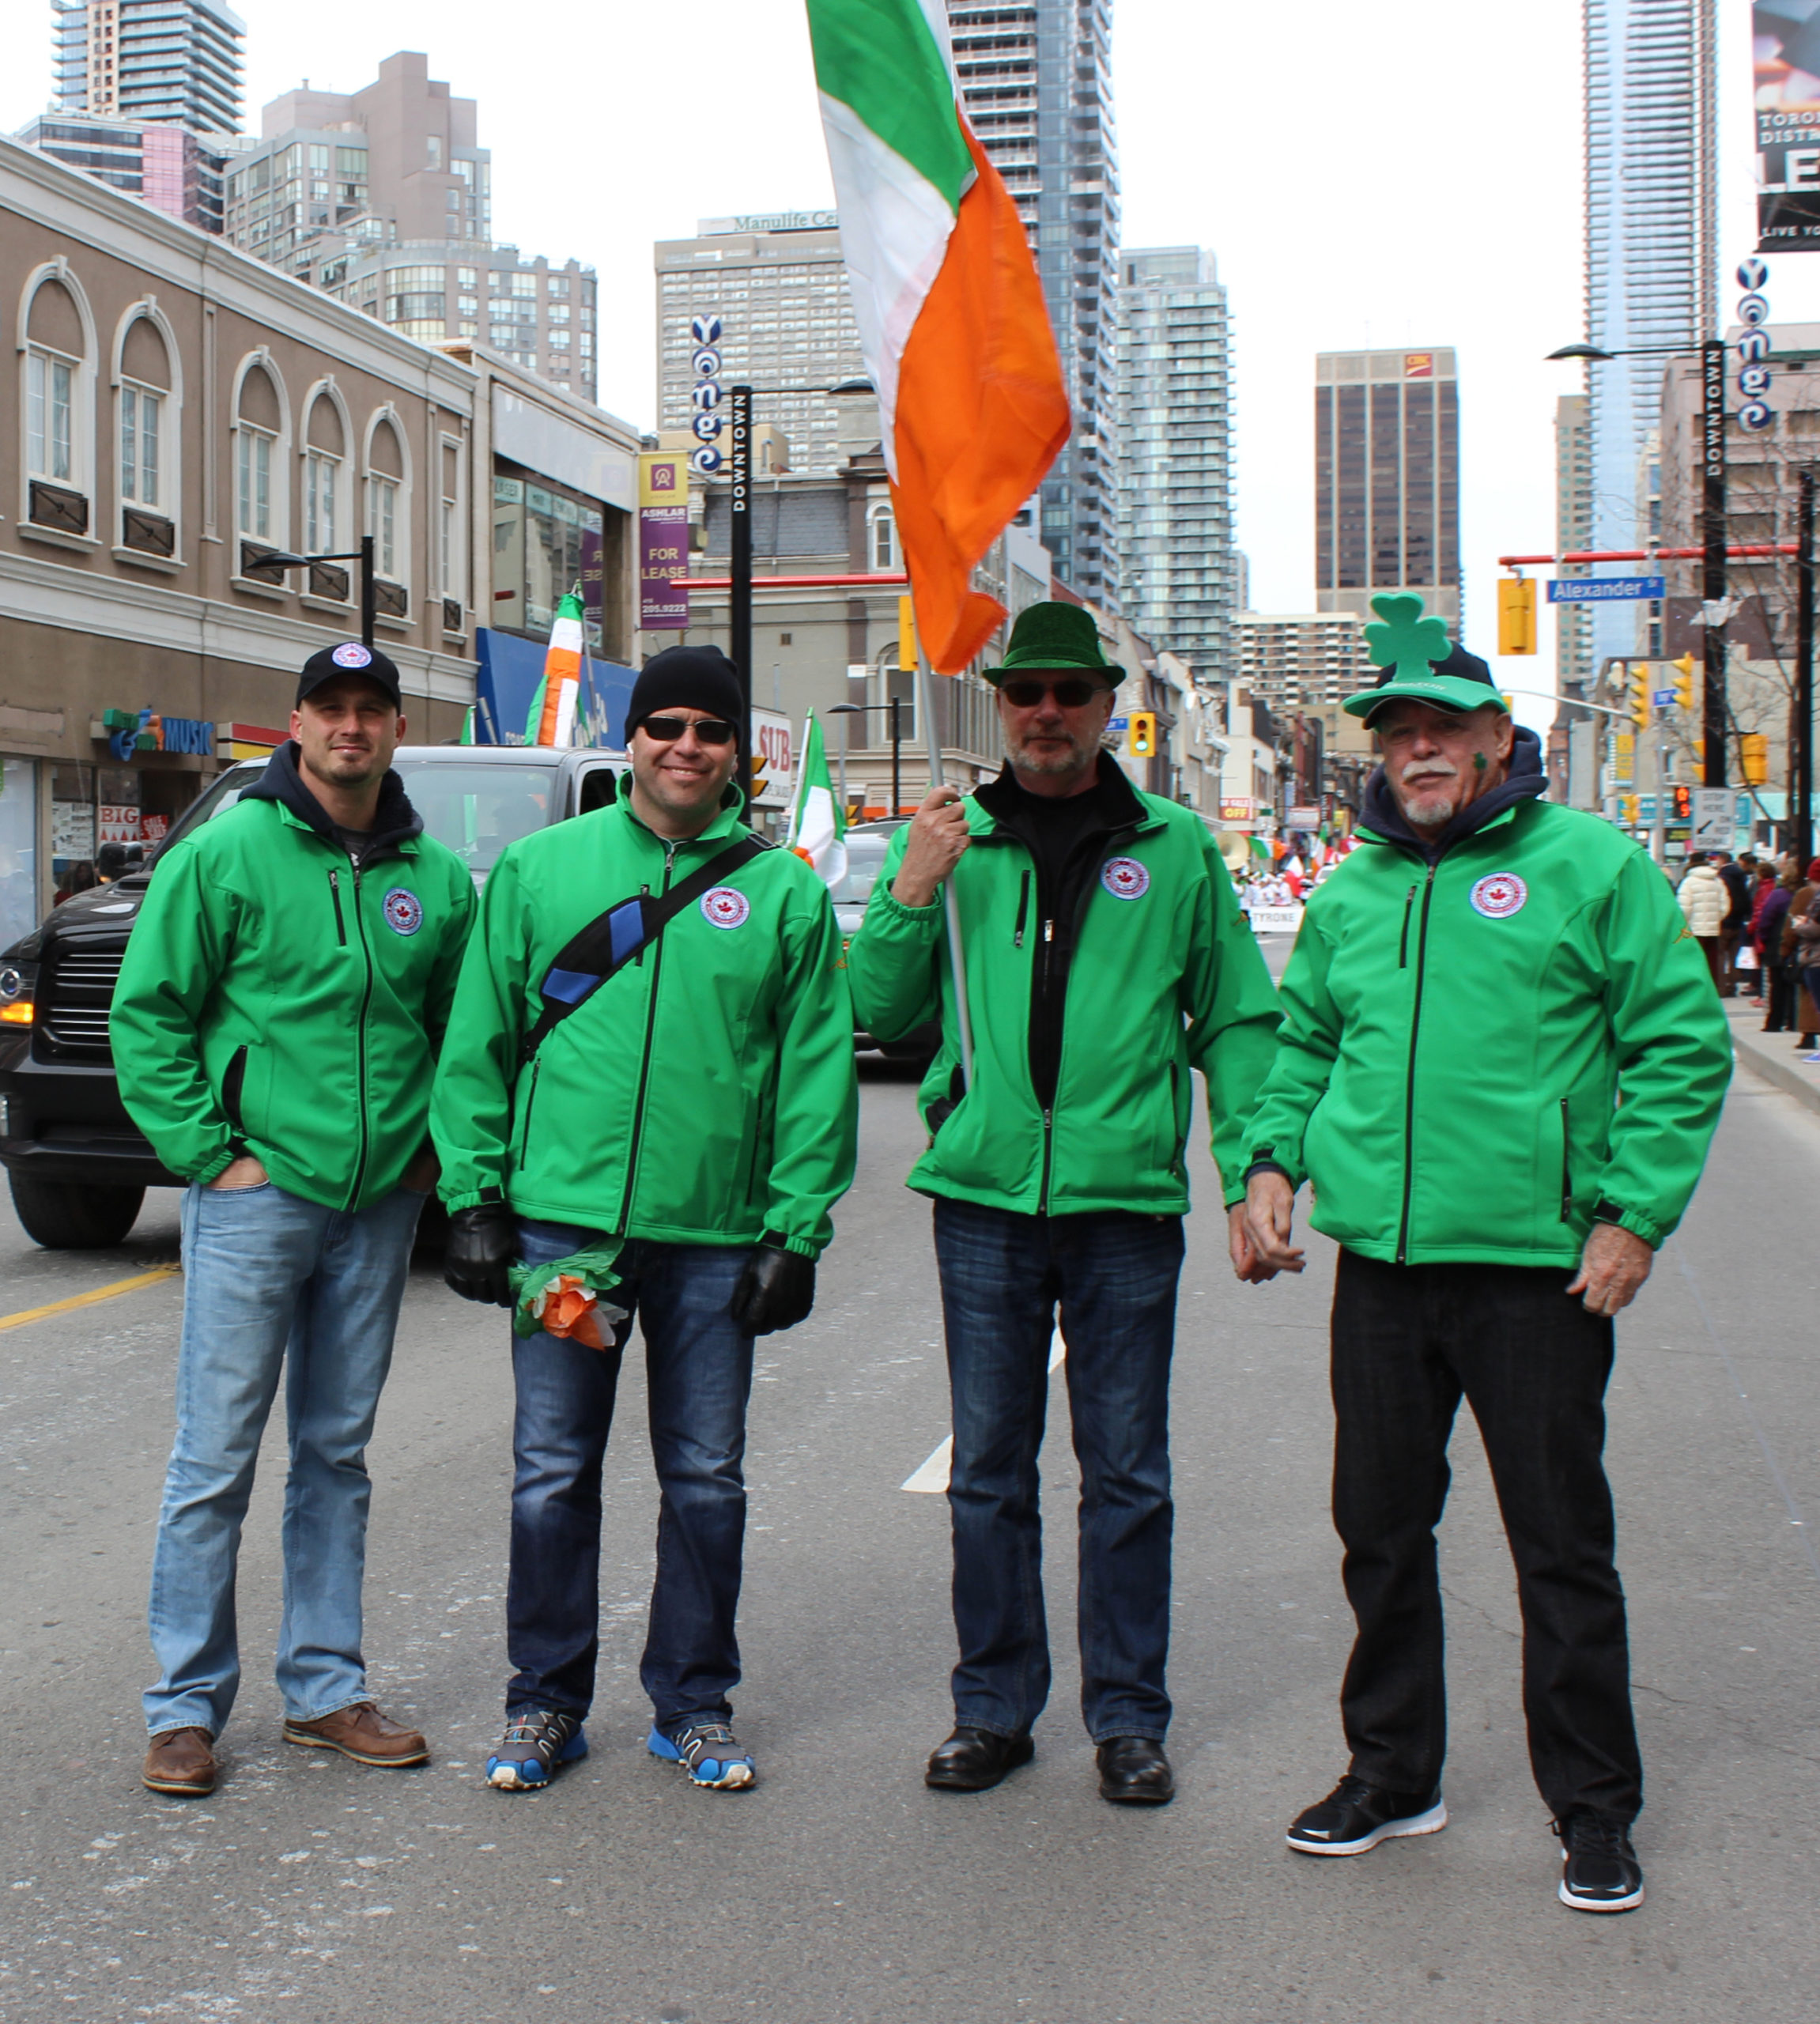 Local 793 members show off their bright green jackets.